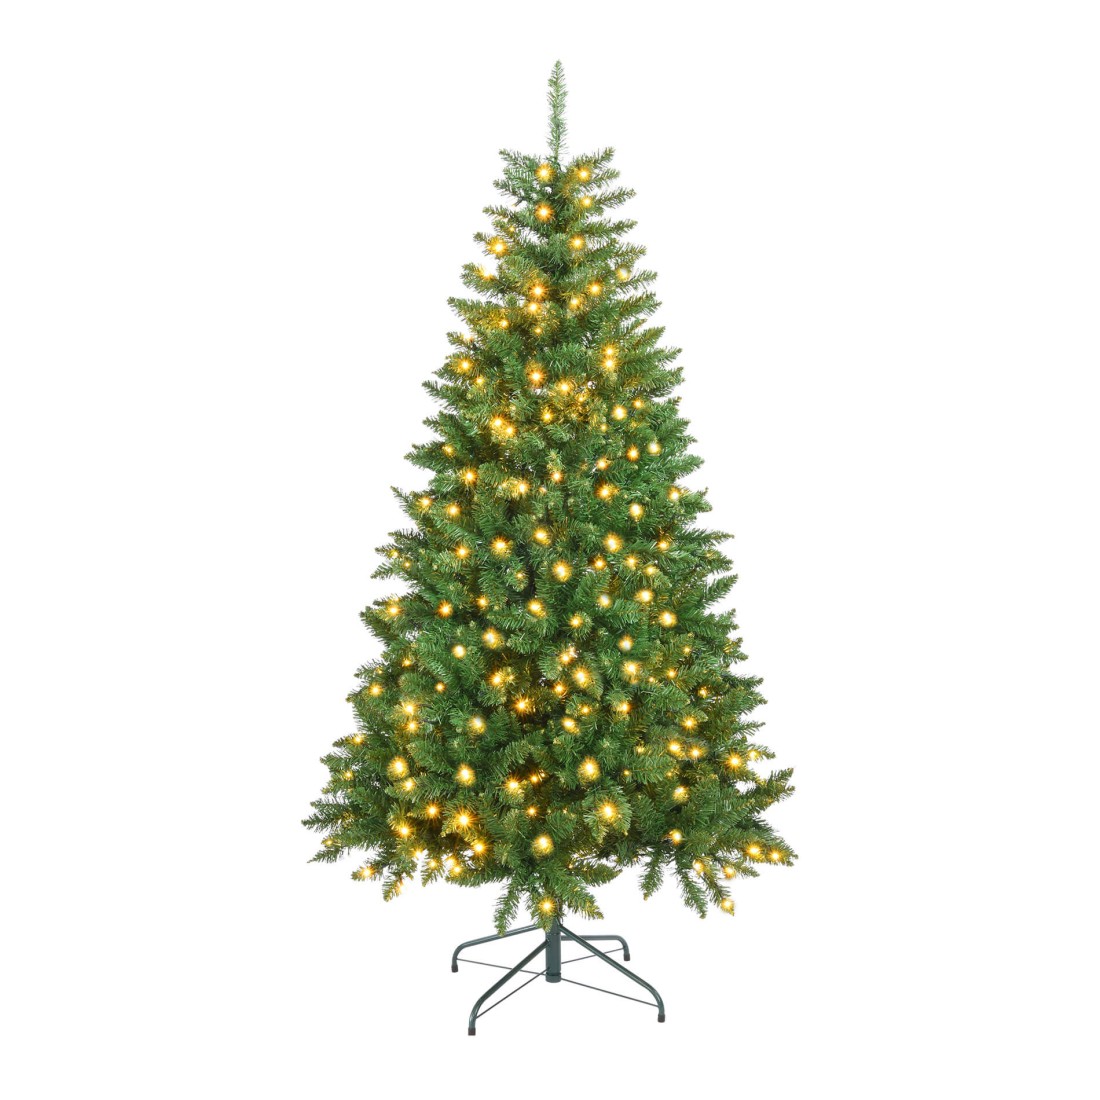 Fake Christmas tree with led lights included